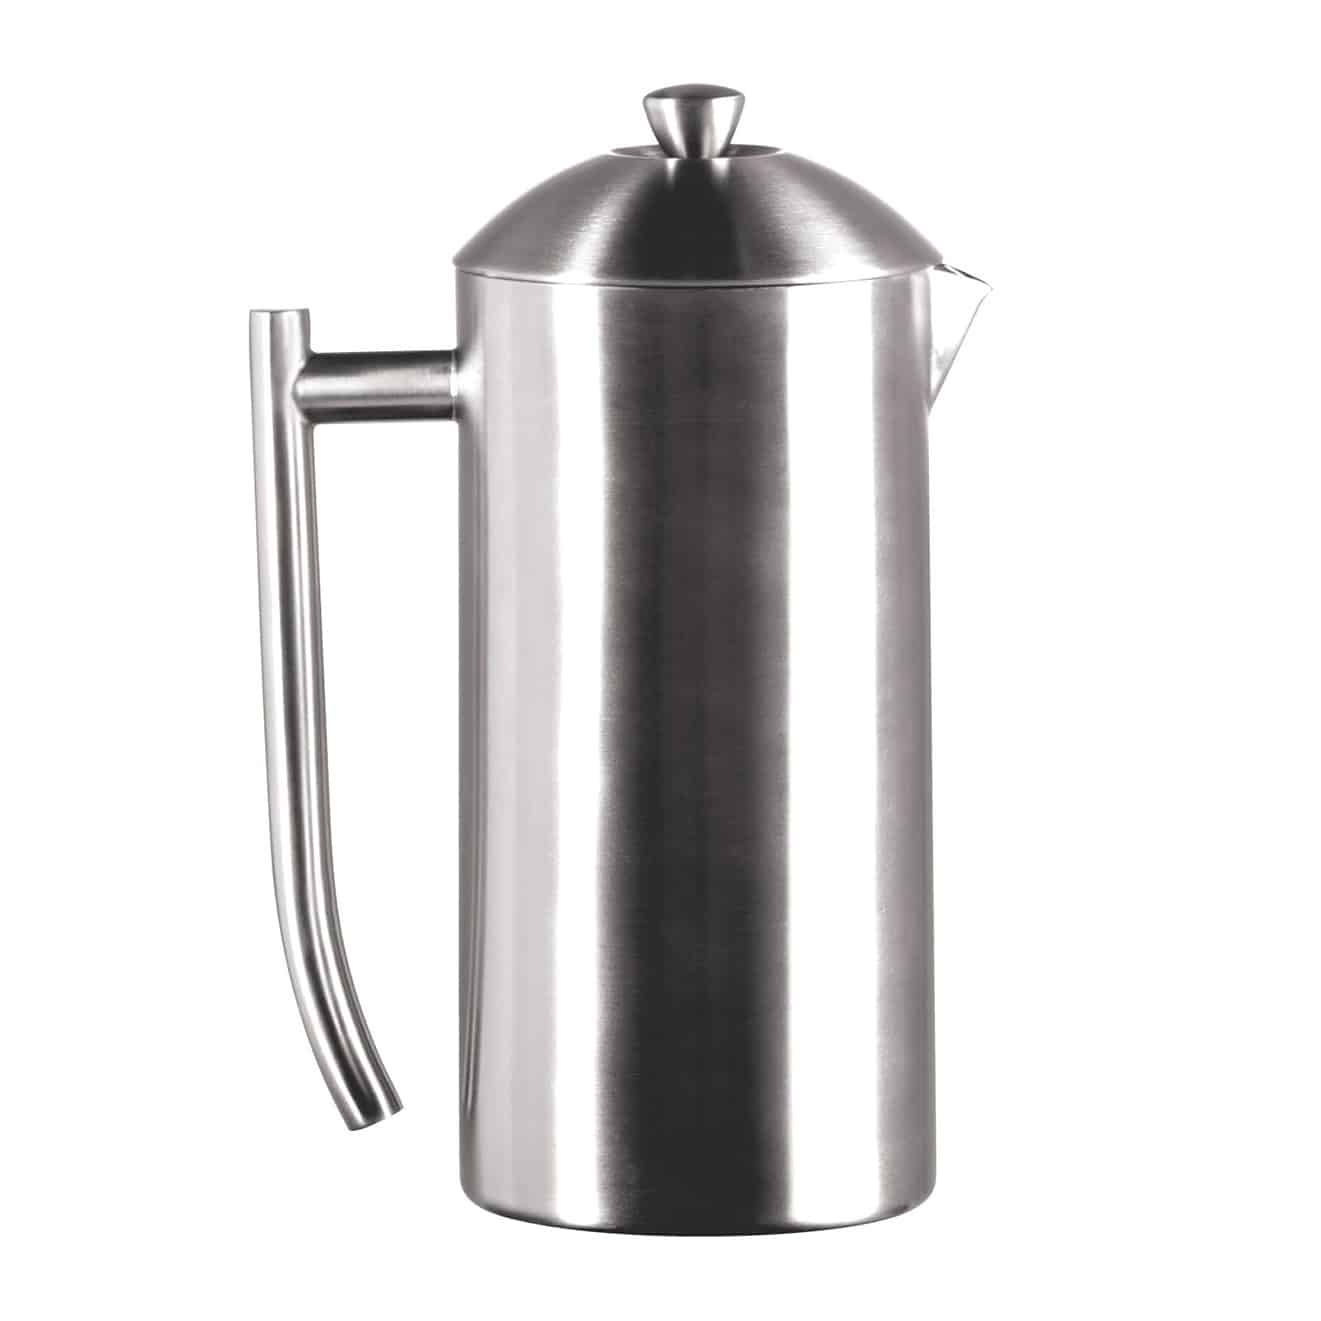 Stainless-Steel French Press